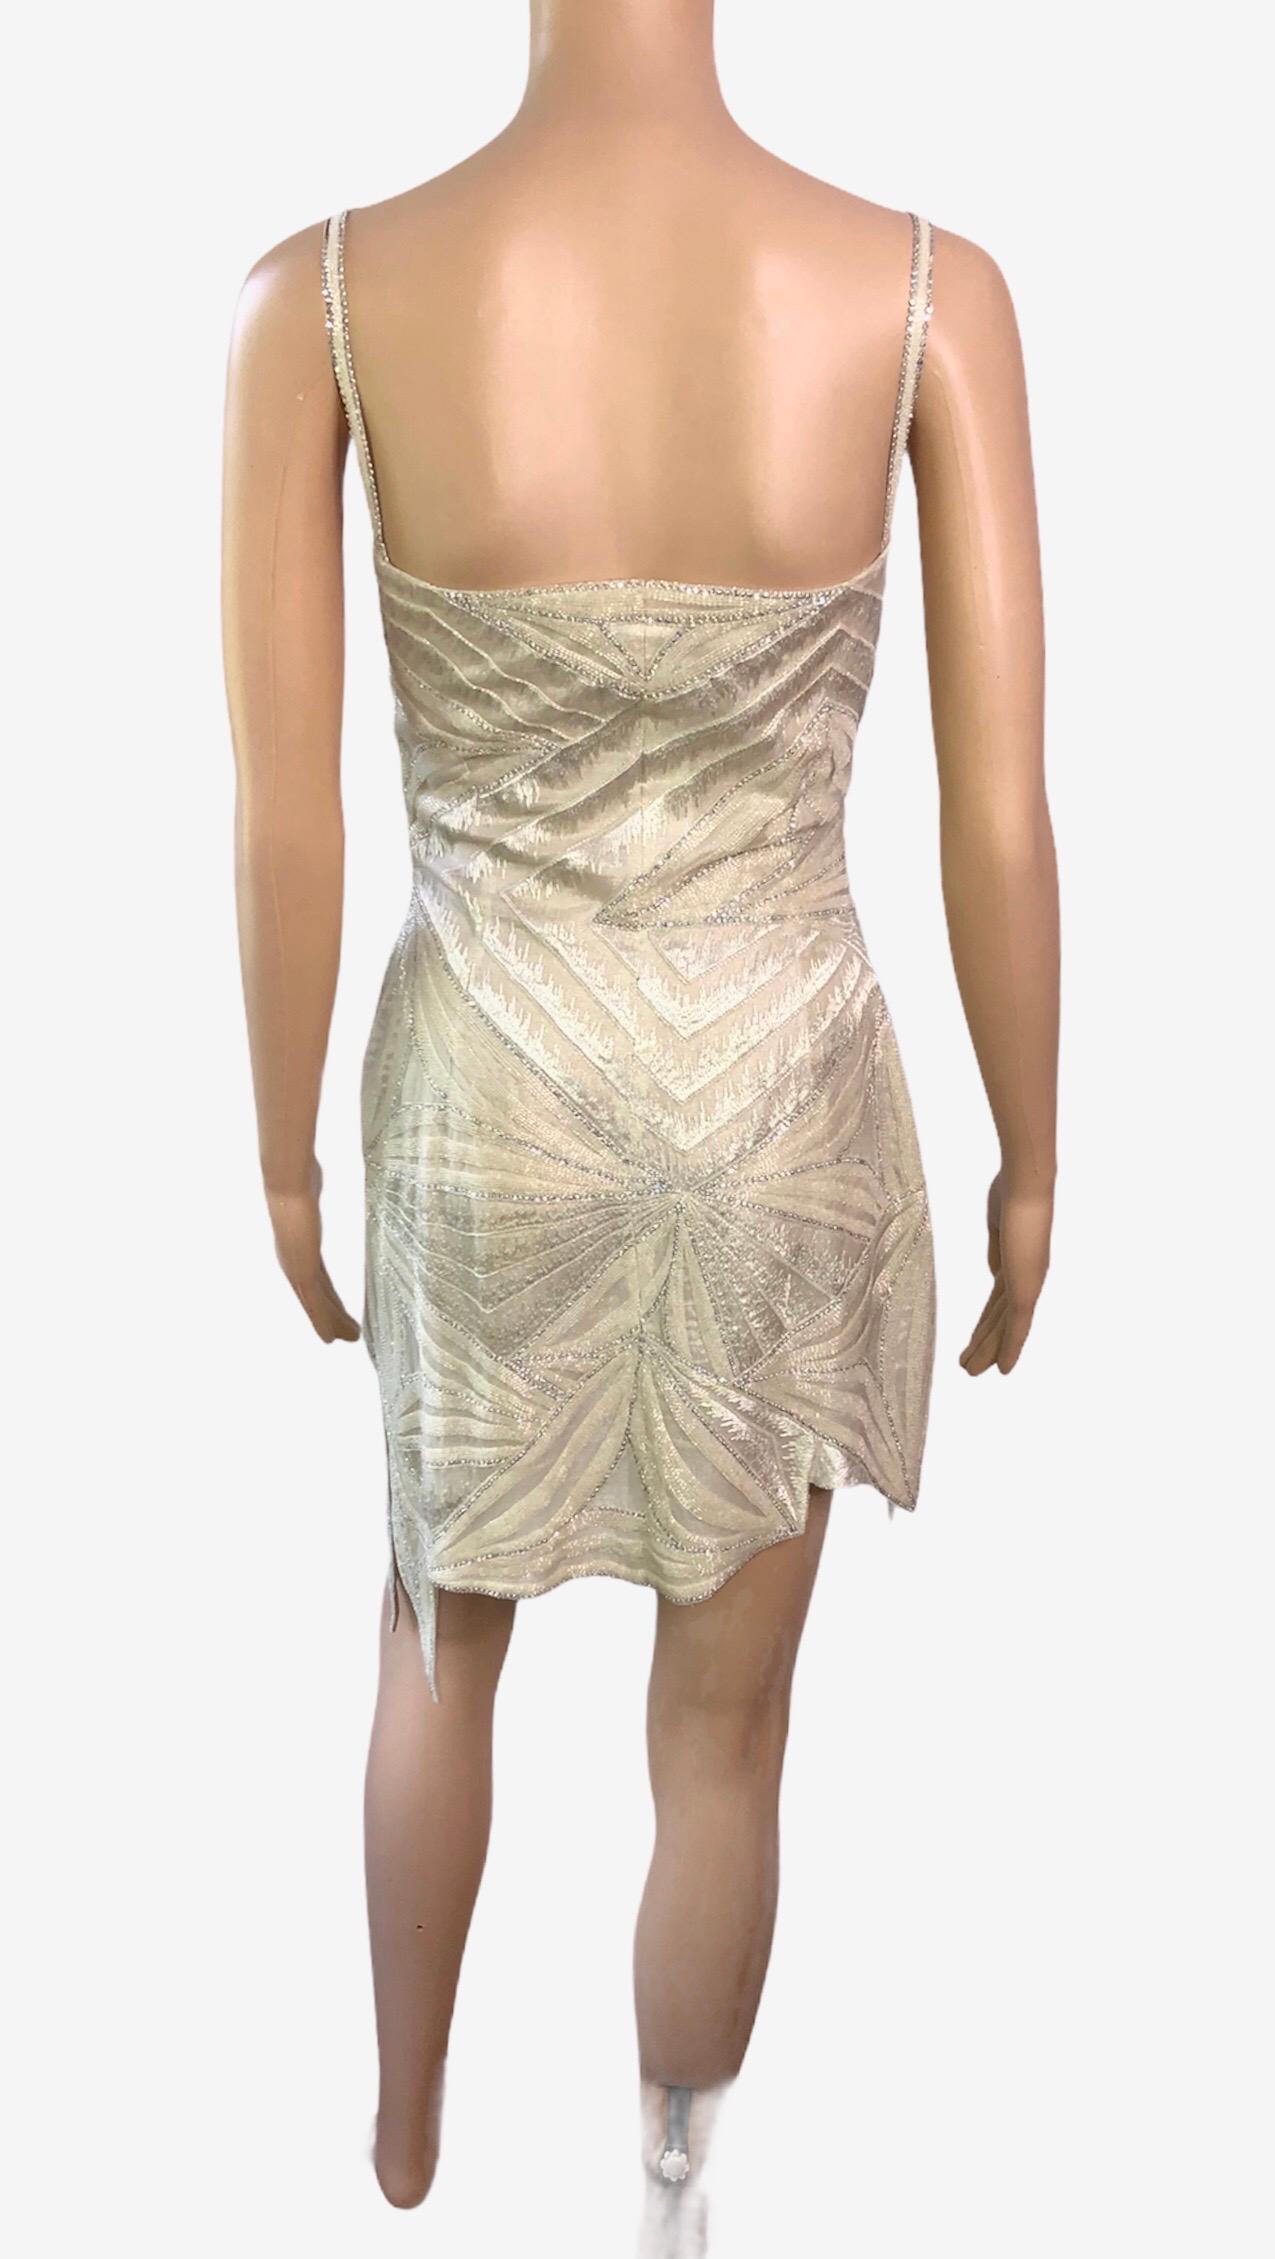 Atelier Versace Haute Couture F/W 1998 Embellished Sheer Cutout Mini Dress For Sale 2